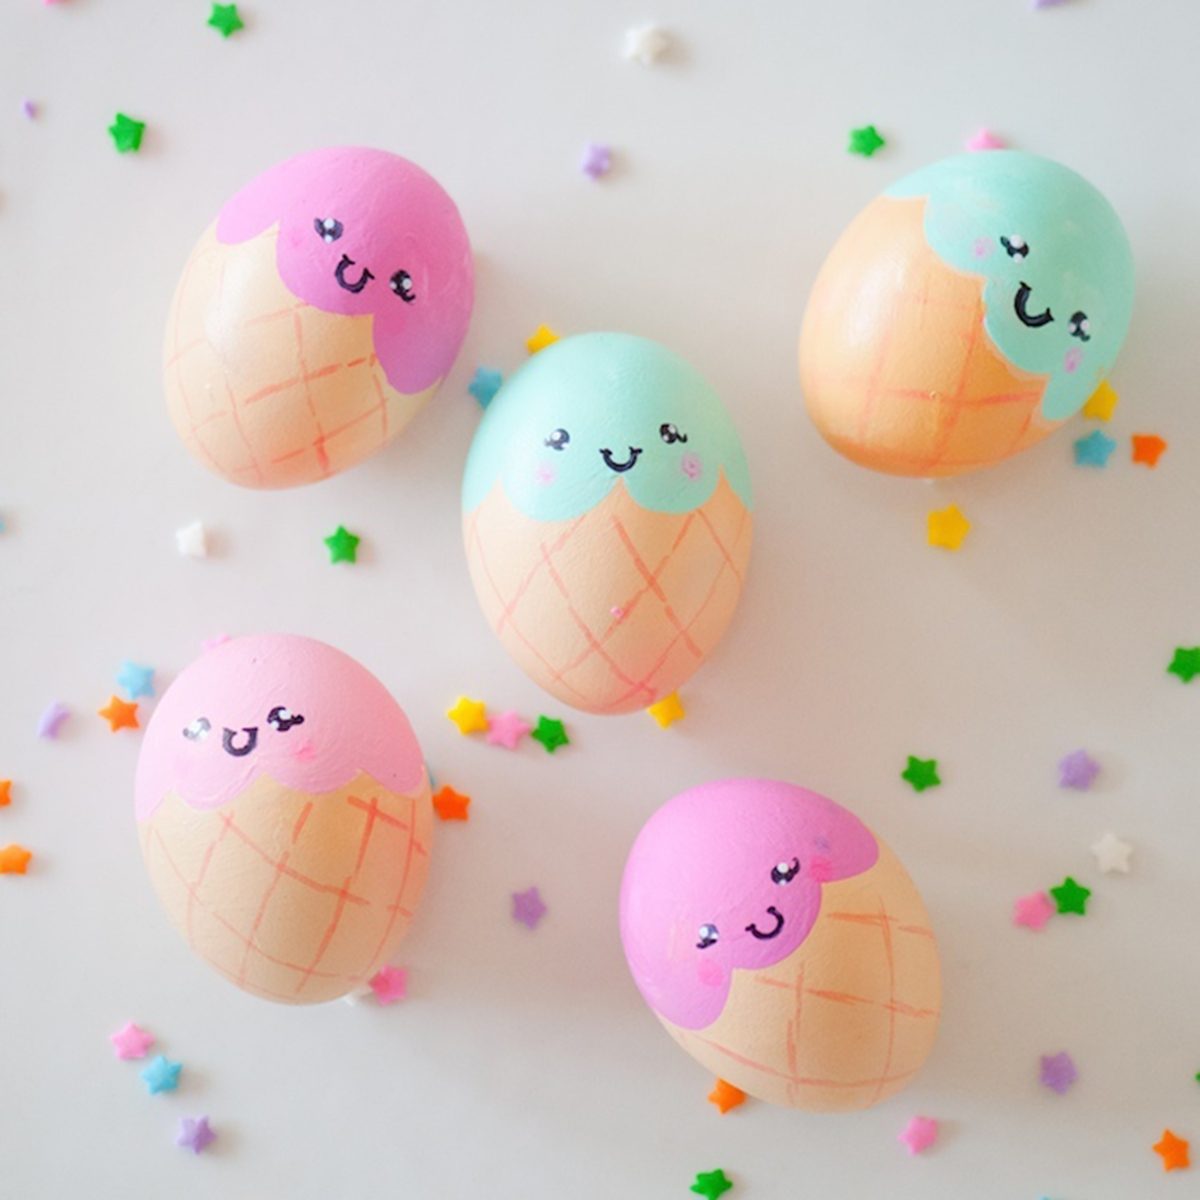 20 Easter Egg Decorating Ideas That Are Too Cute